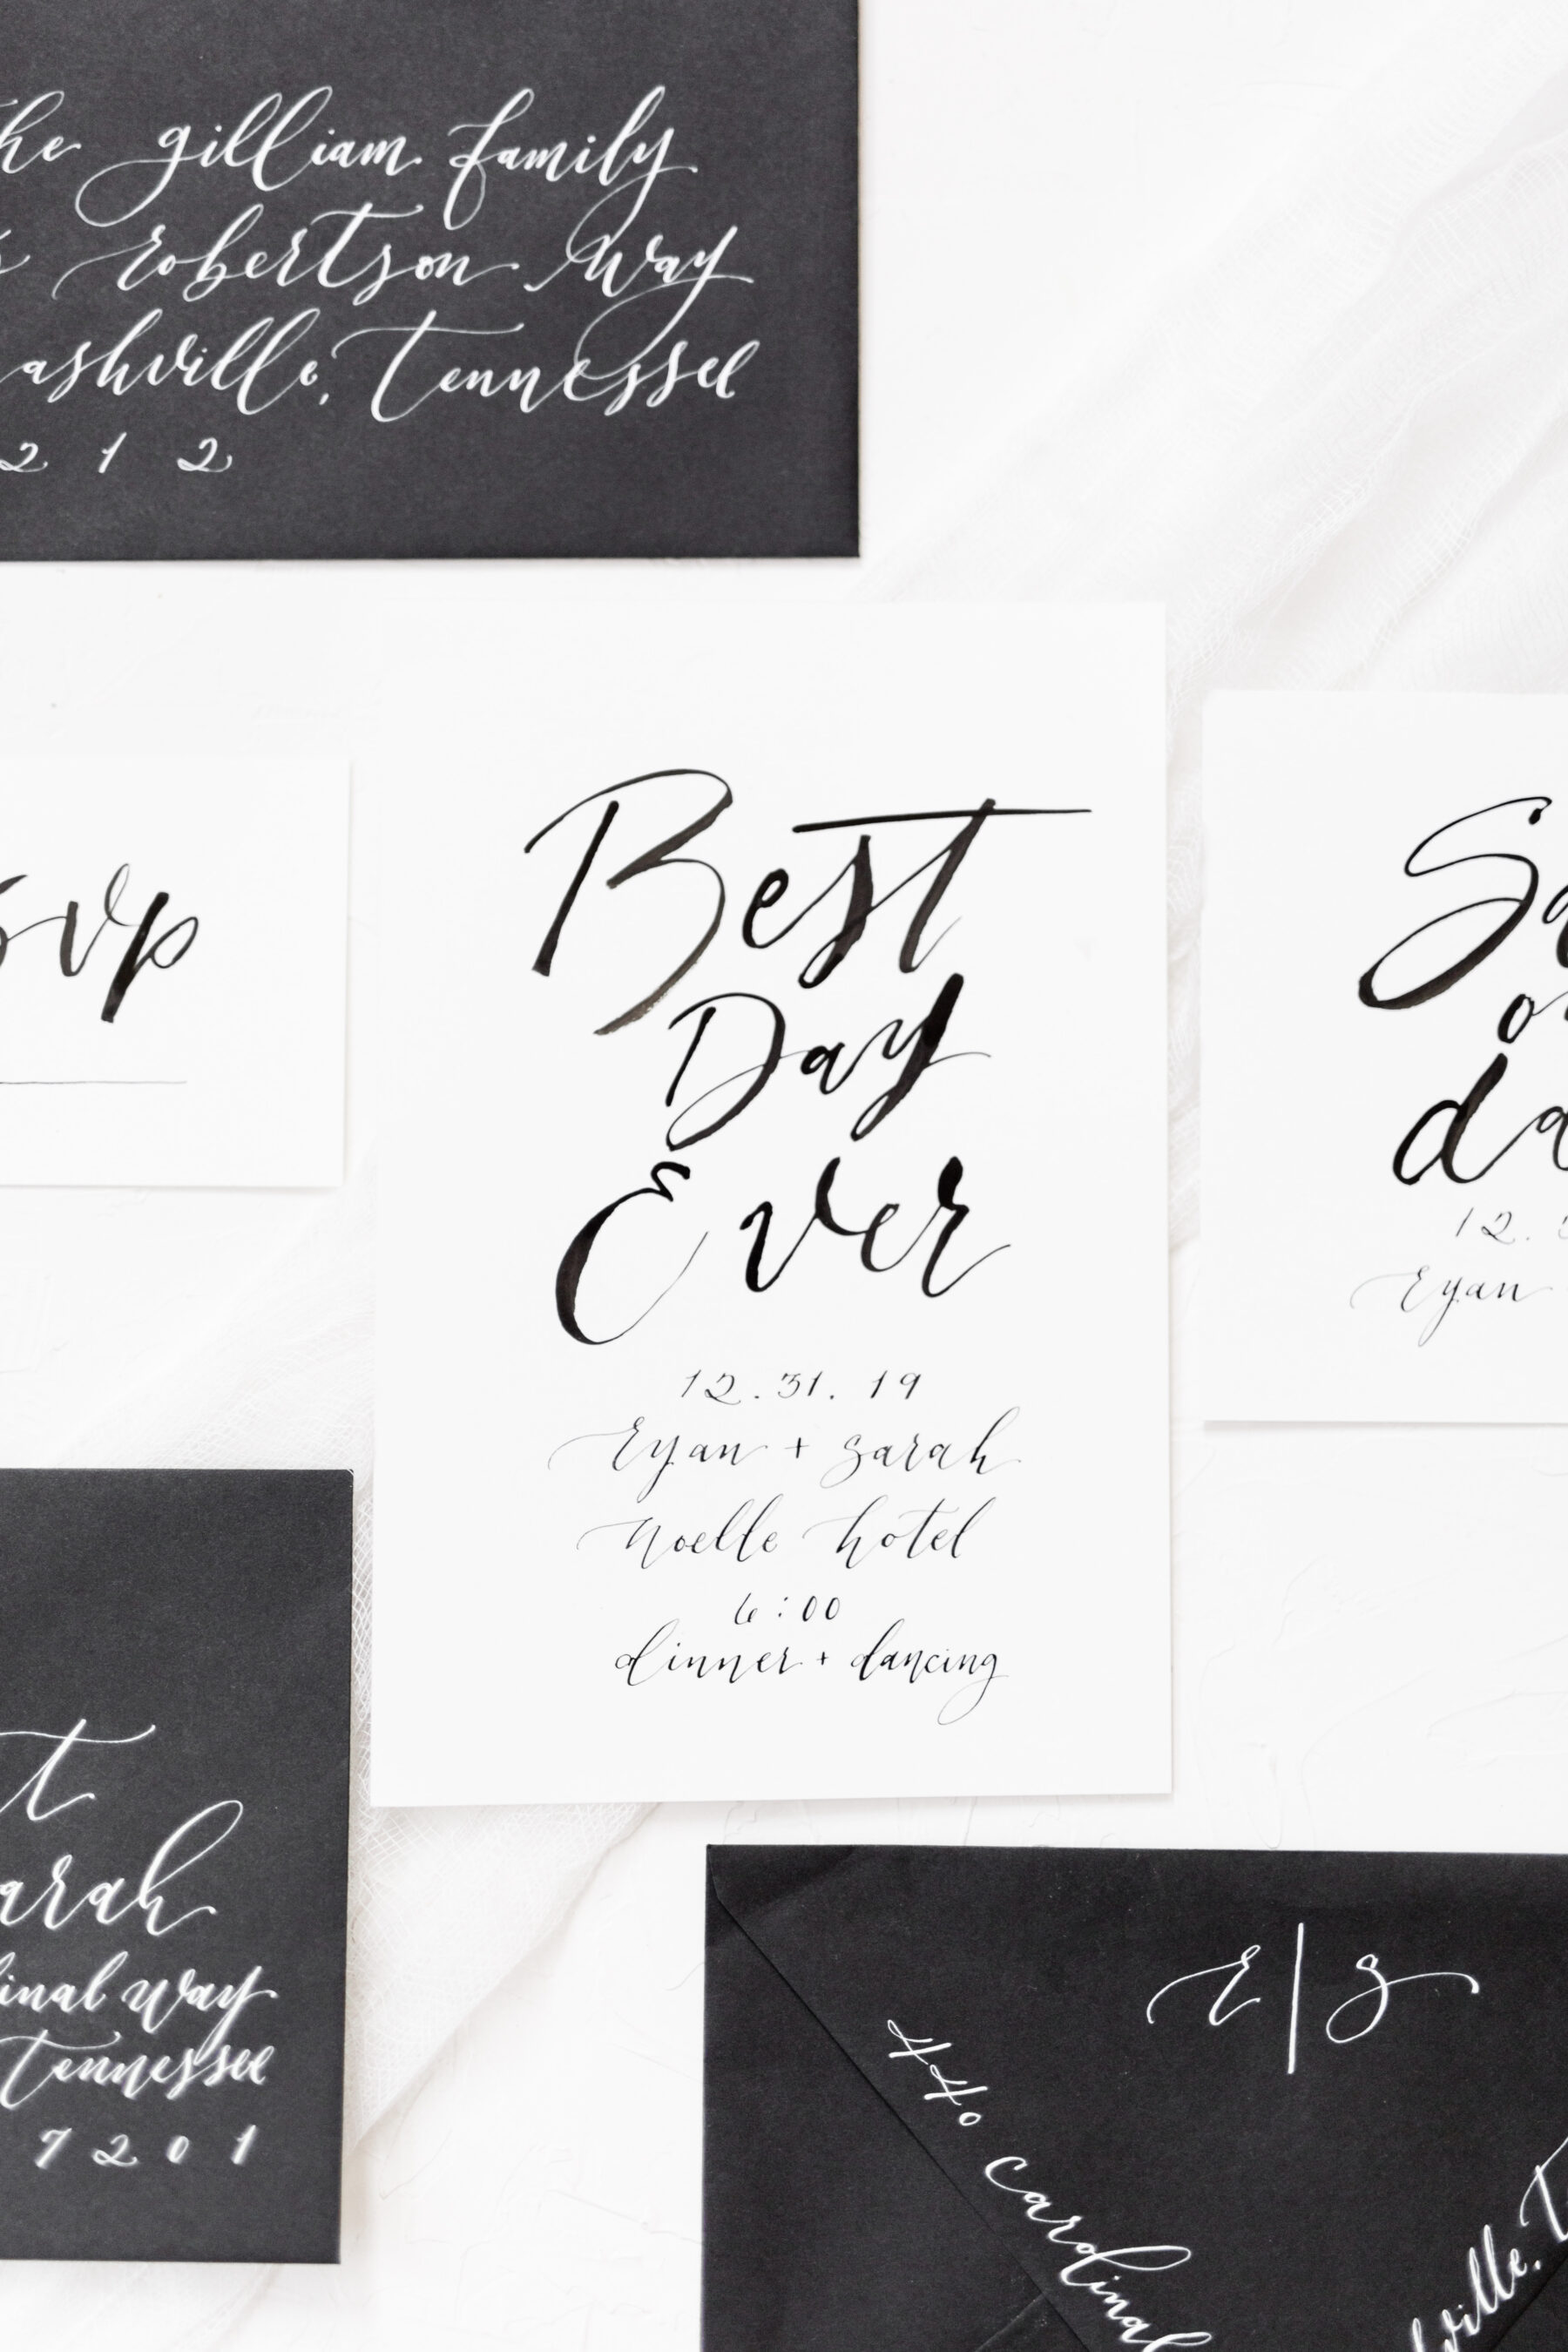 Modern black and white wedding invitations: Classic, Yet Modern New Years Eve Wedding Inspiration featured on Nashville Bride Guide